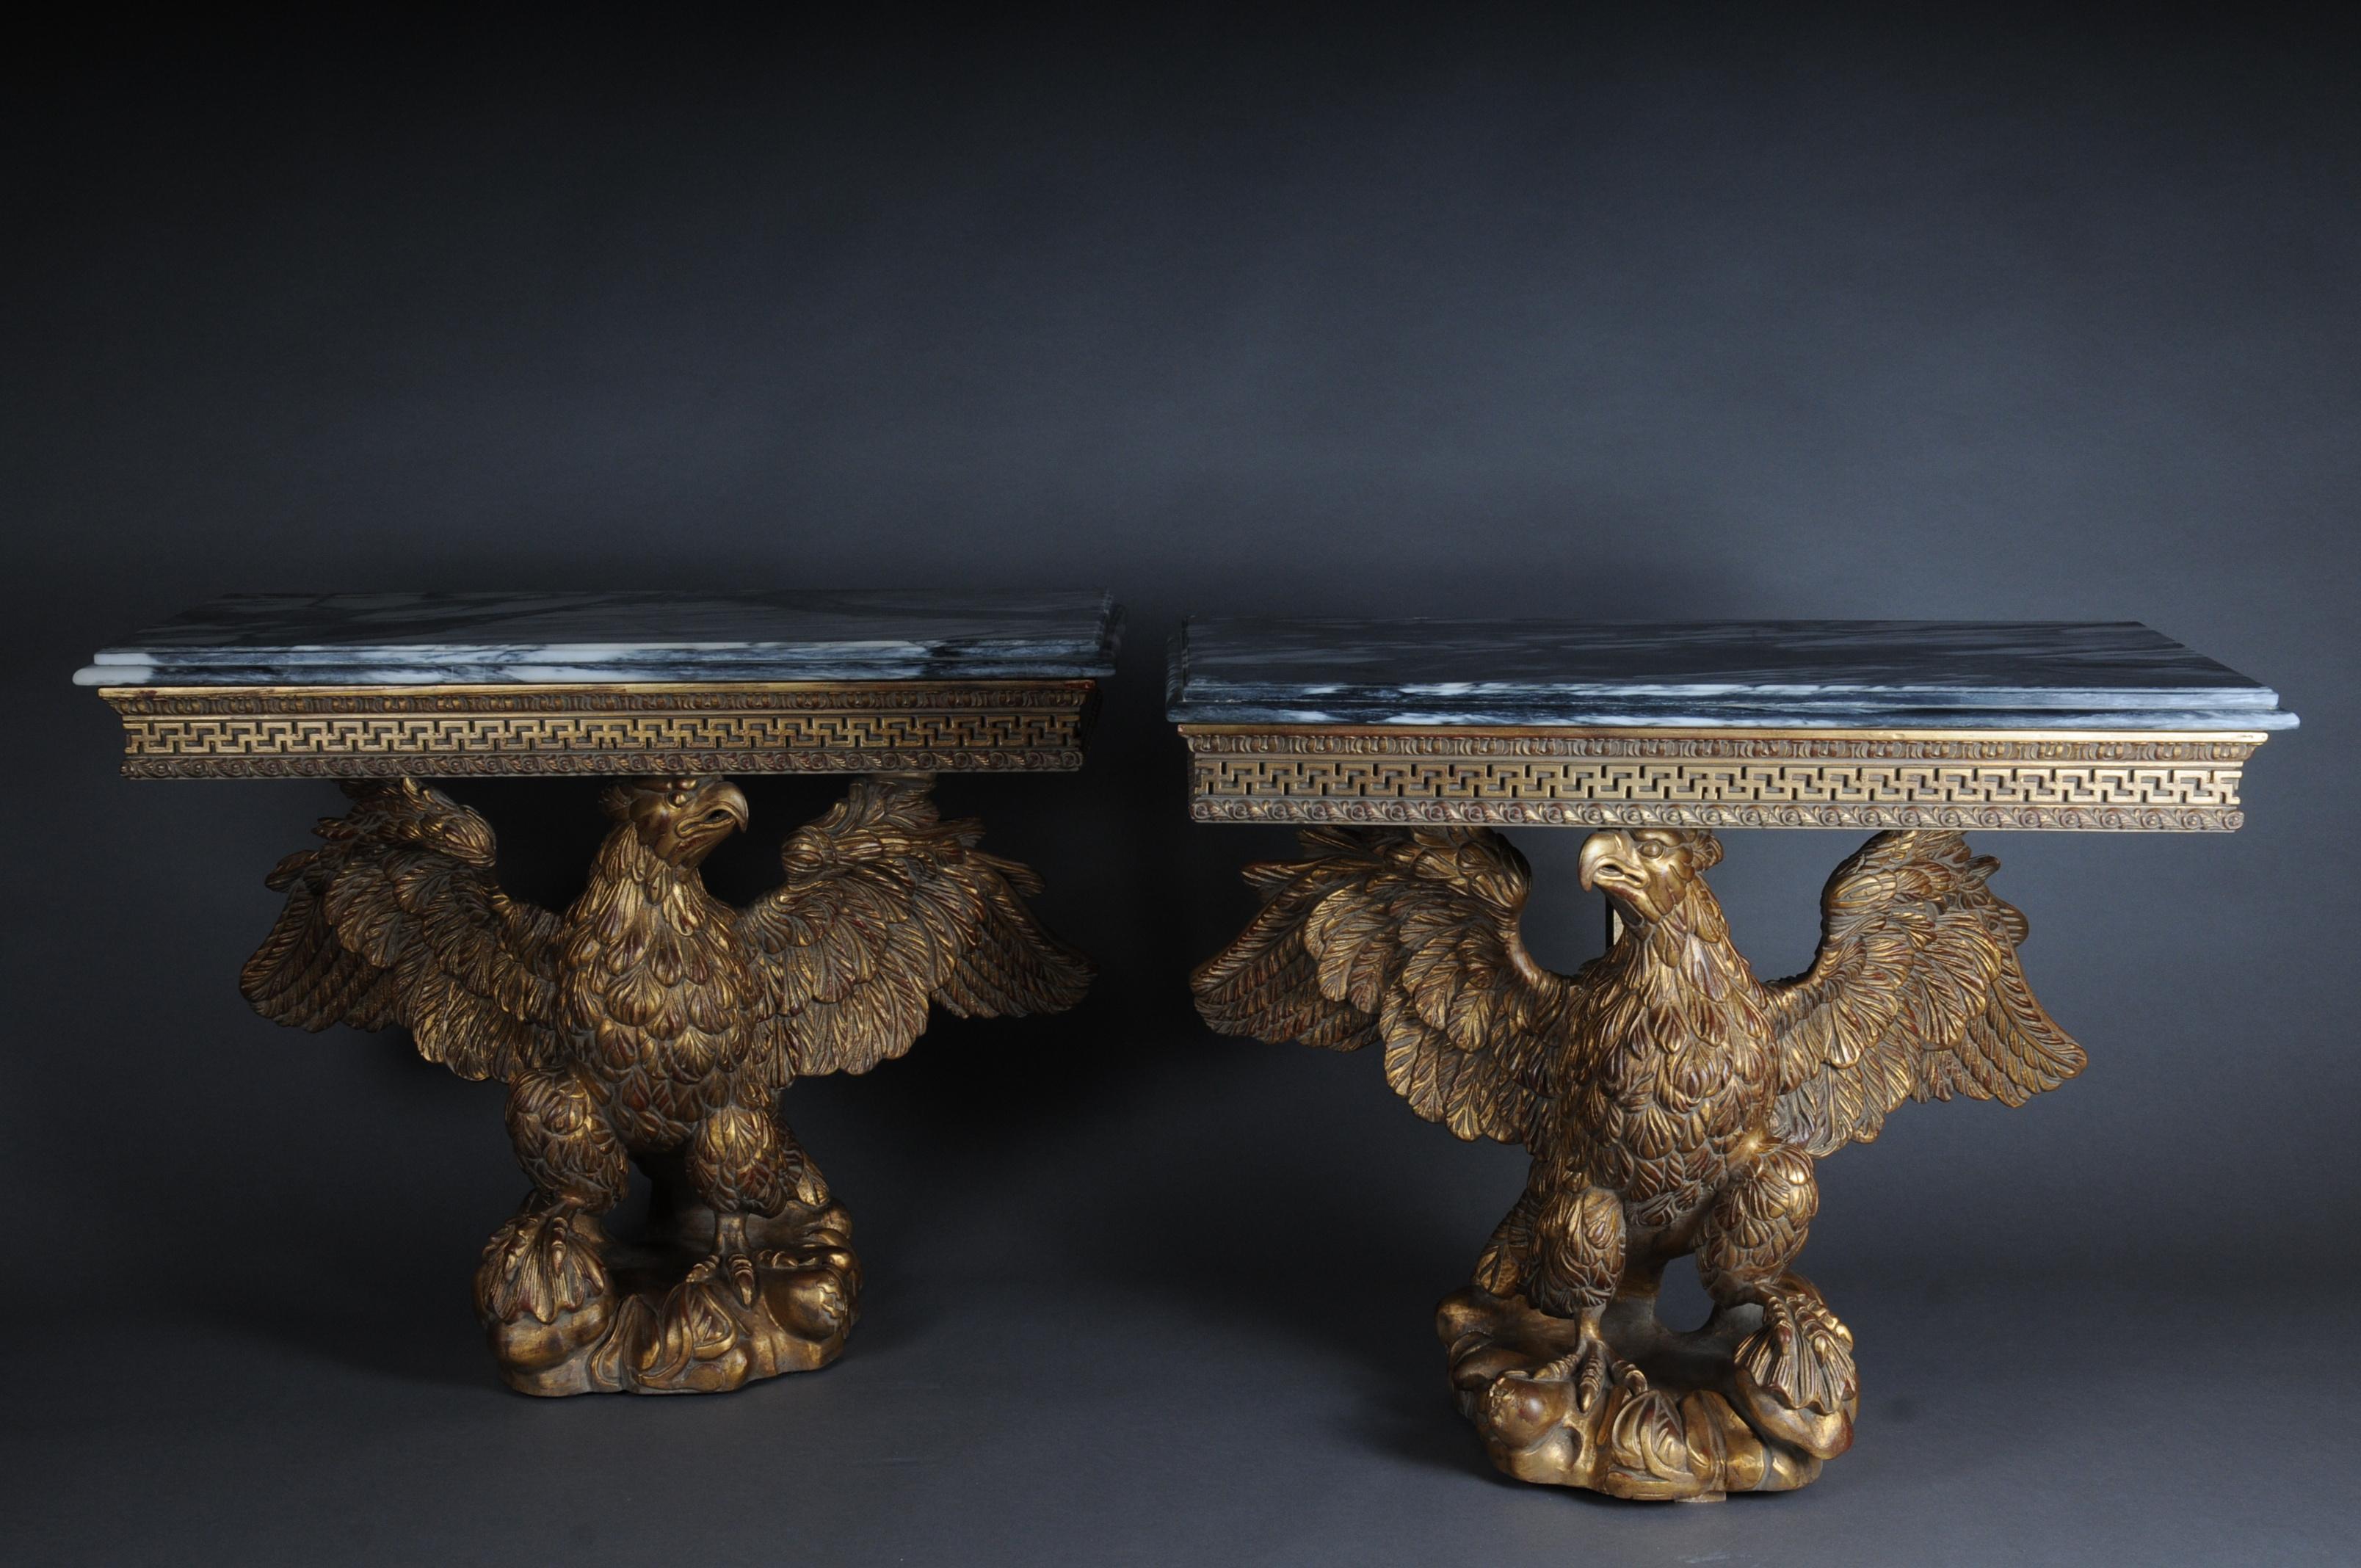 A pair of magnificent eagle consoles designed by William Kent 1685-1748

A few (2) consoles from the Régence era. Monumental, fully sculptural and hand carved eagles made of solid beech wood. Gilded, each standing on a rock-shaped base. Solid